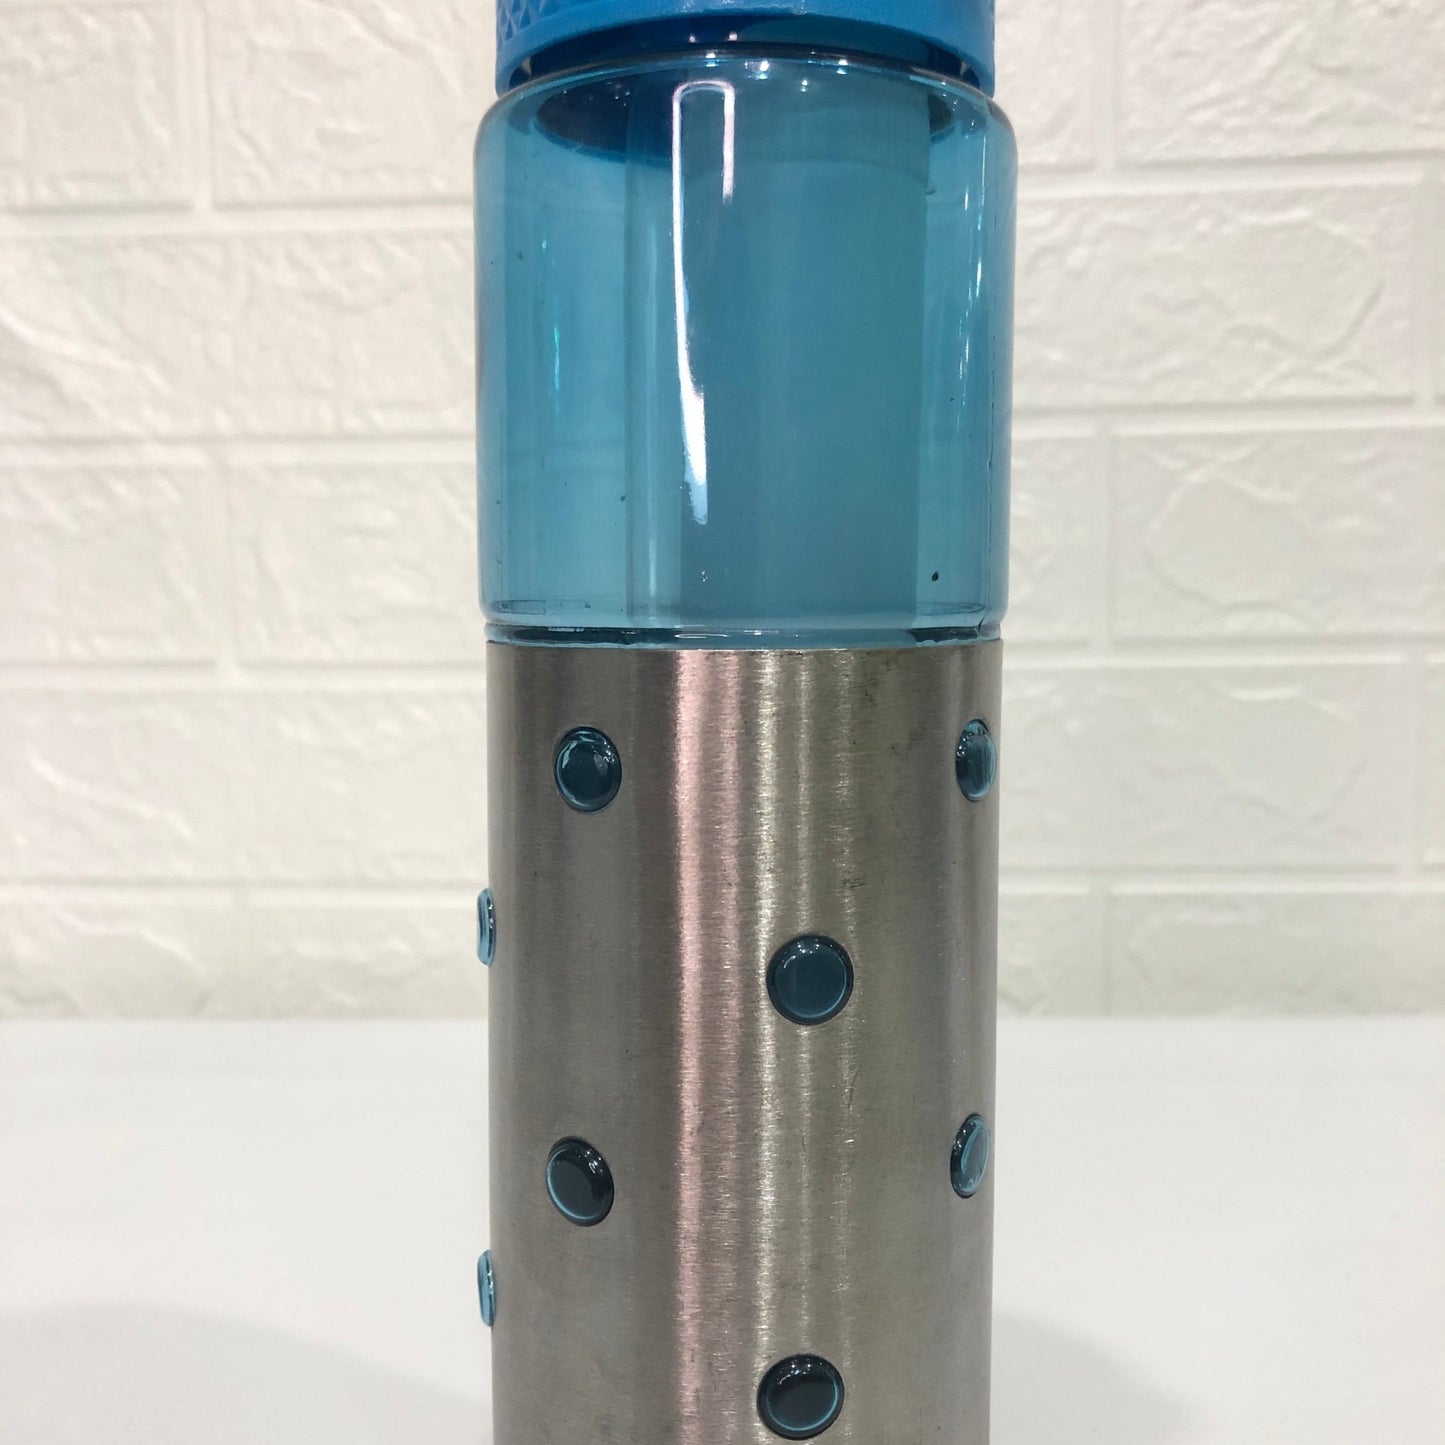 Steel Water Bottle With Ice Container - DS Traders